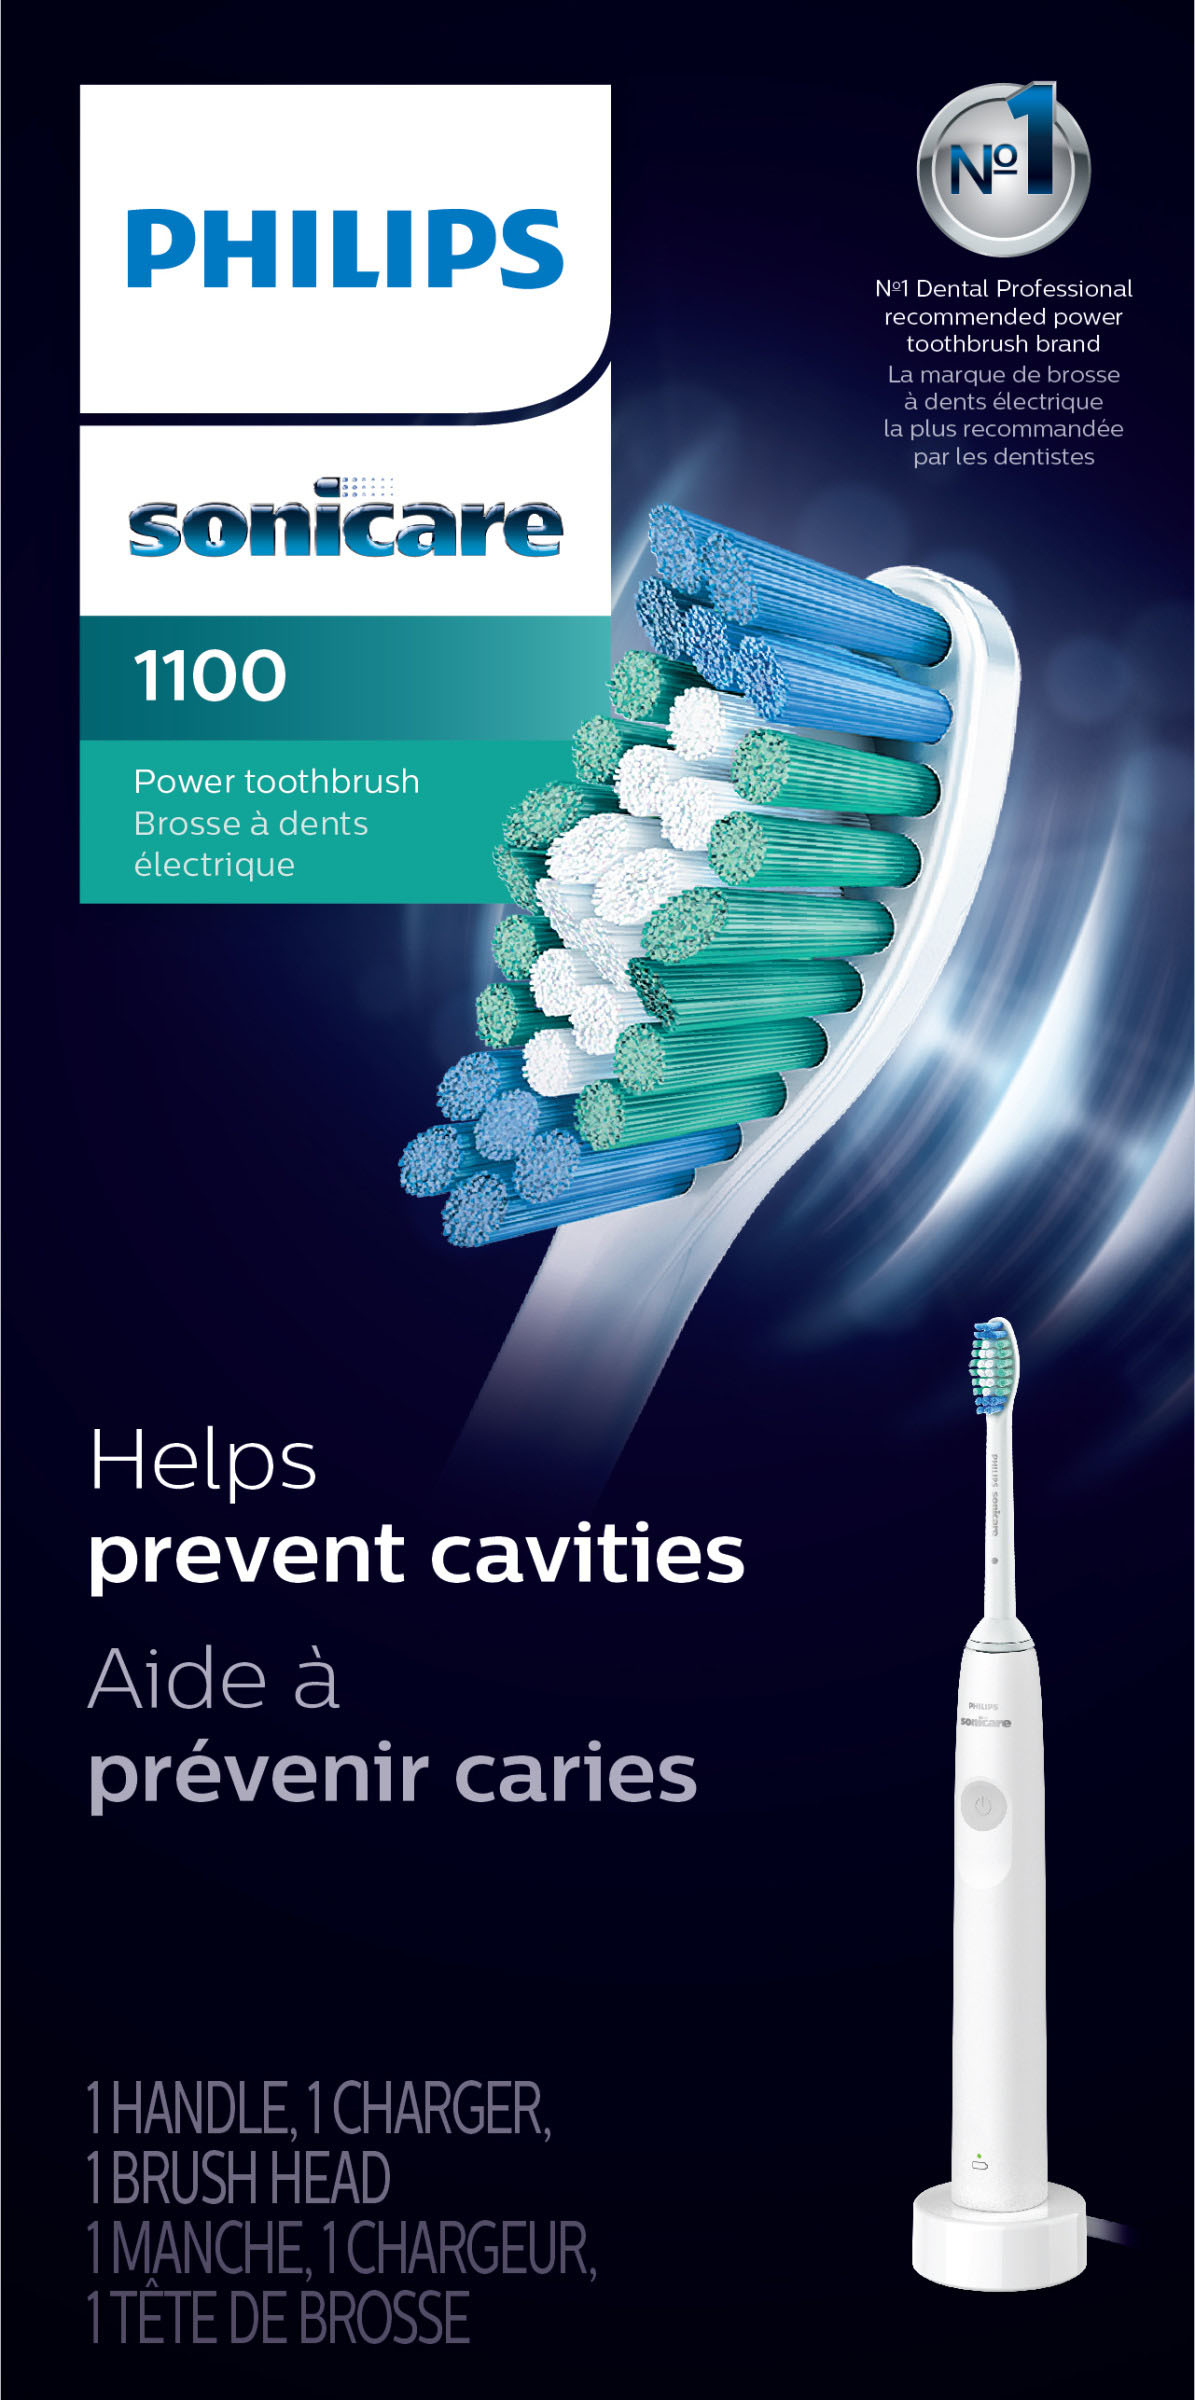 Philips White Toothbrush Electric Best - Sonicare Grey HX3641/02 Power Rechargeable Buy Toothbrush, 1100